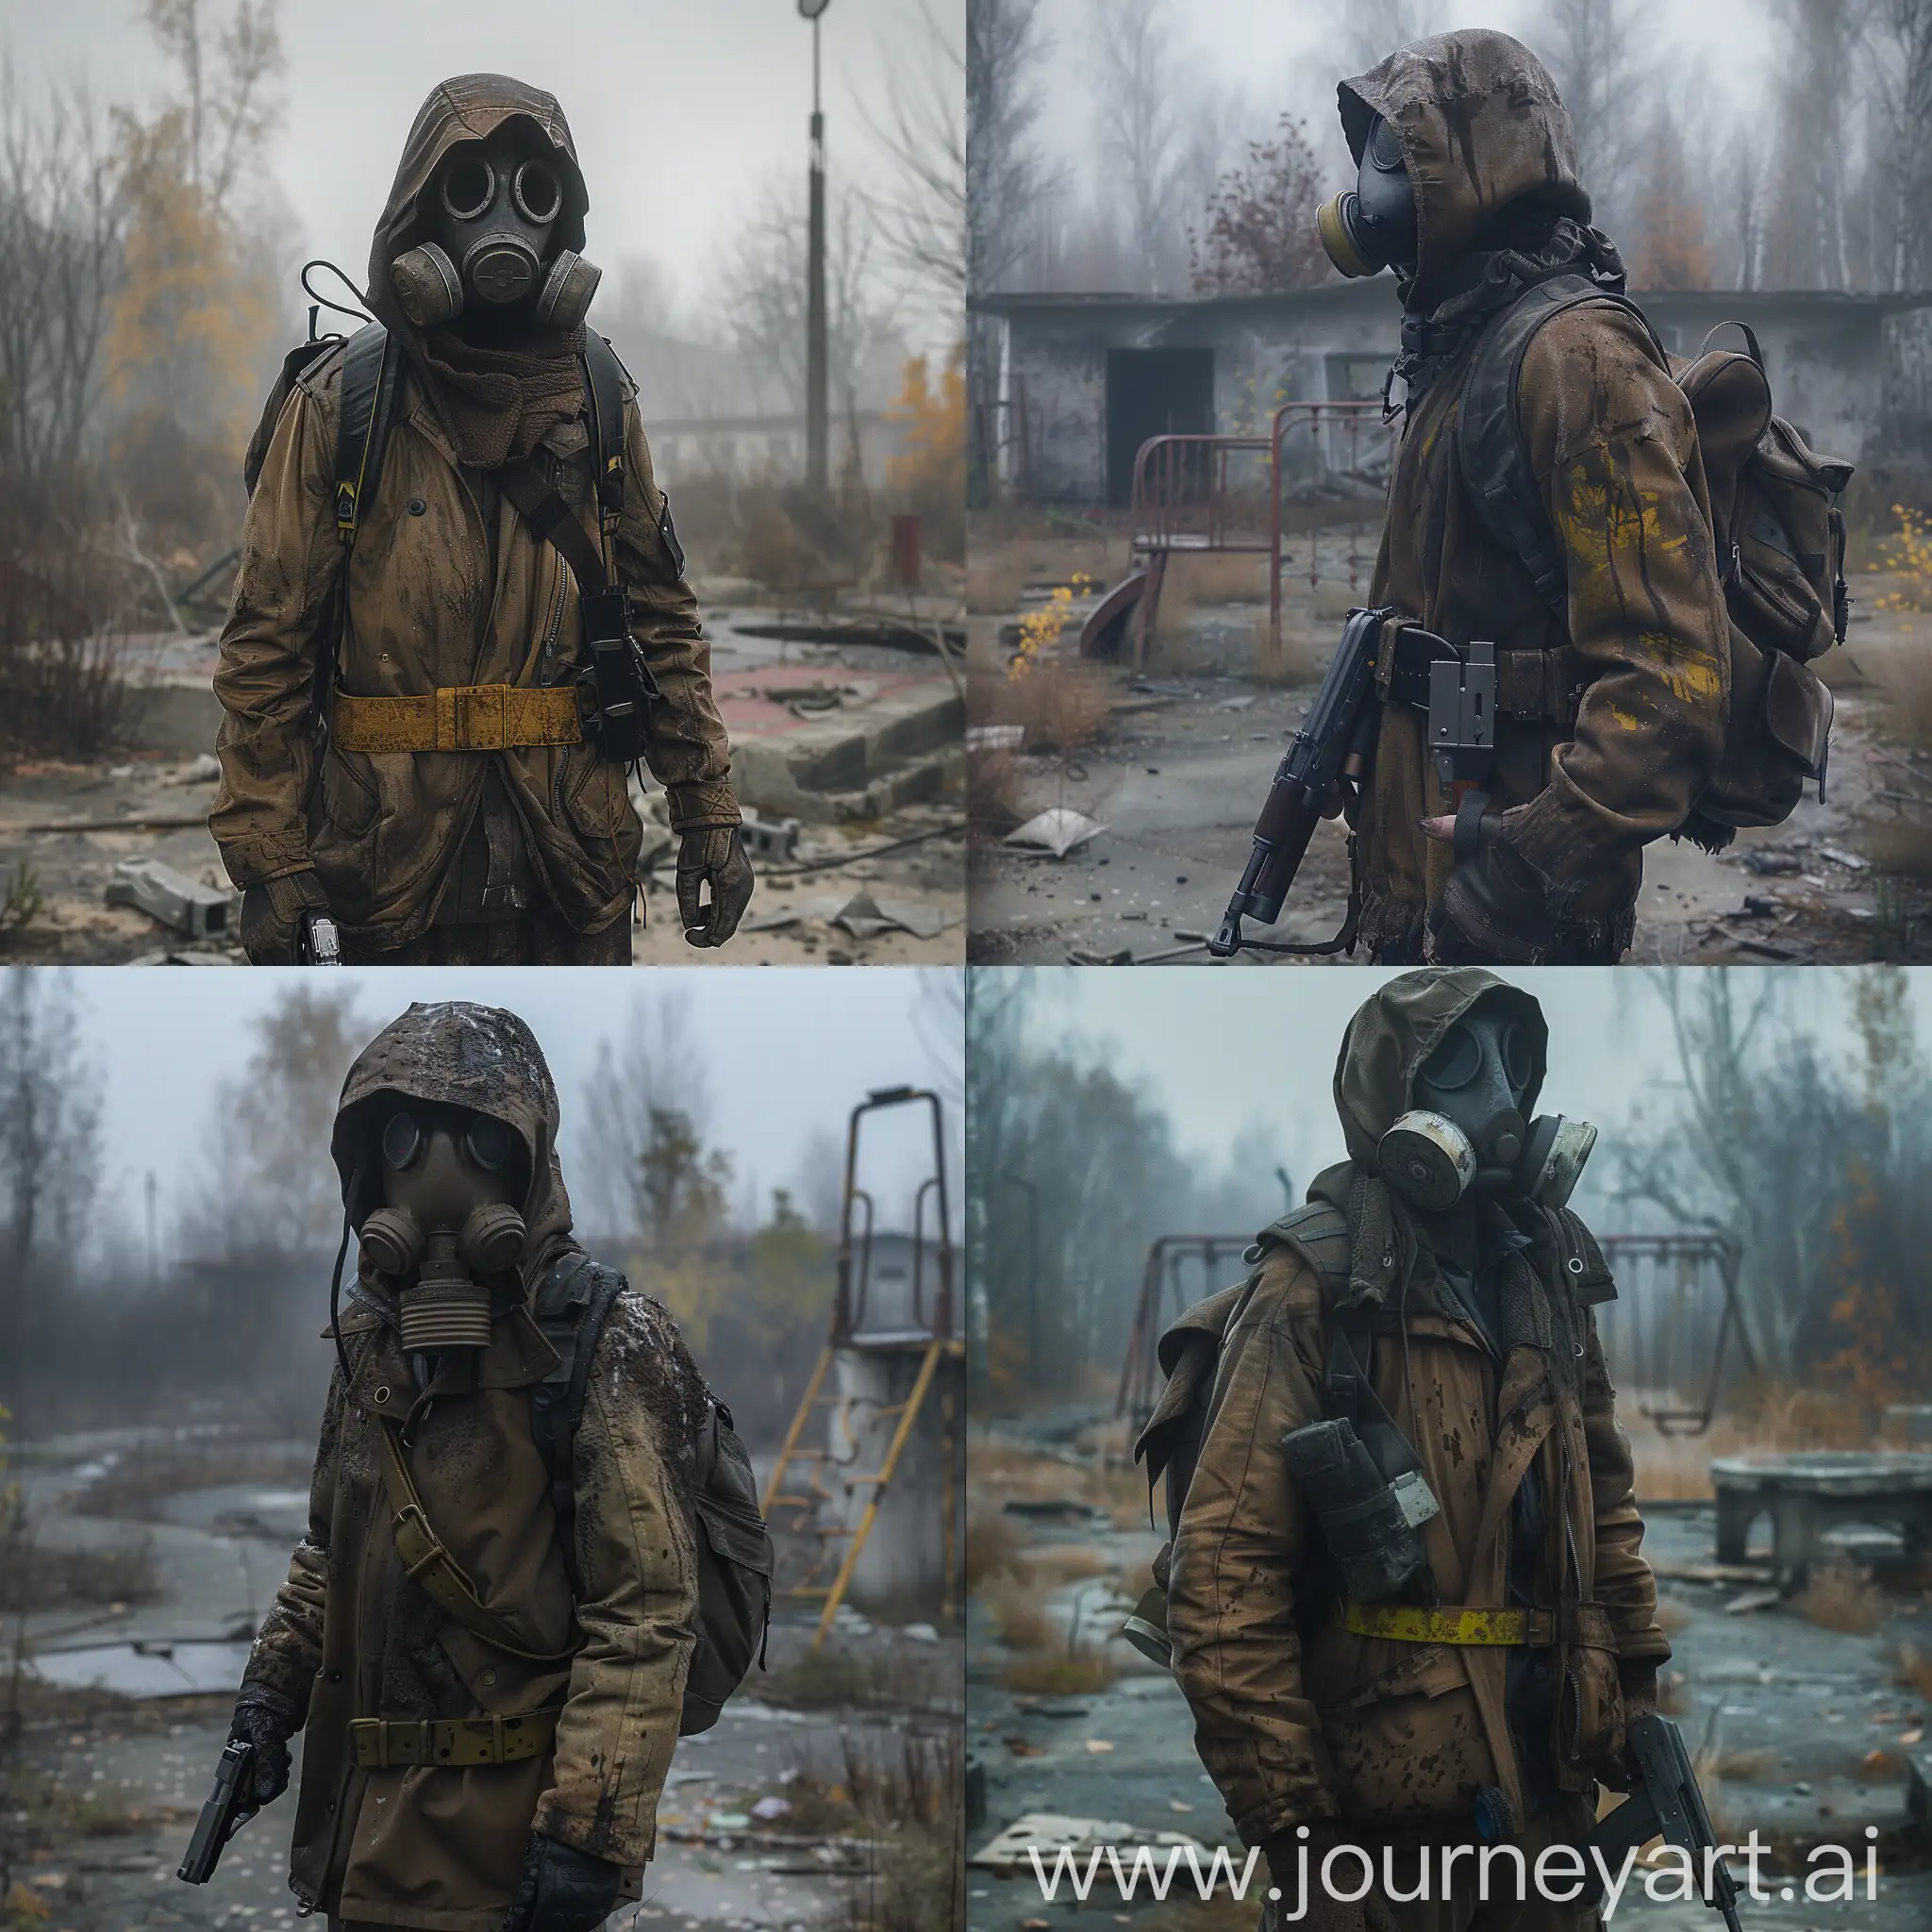 The stalker is a lone newcomer, a gas mask, a dirty light brown jacket, a Soviet belt, a small backpack on his back, a light military discharge on his body, a chest lamp, a pistol in one hand, the stalker stands in the middle of an abandoned Soviet playground in the abandoned city of Pripyat, gloomy autumn, fog.